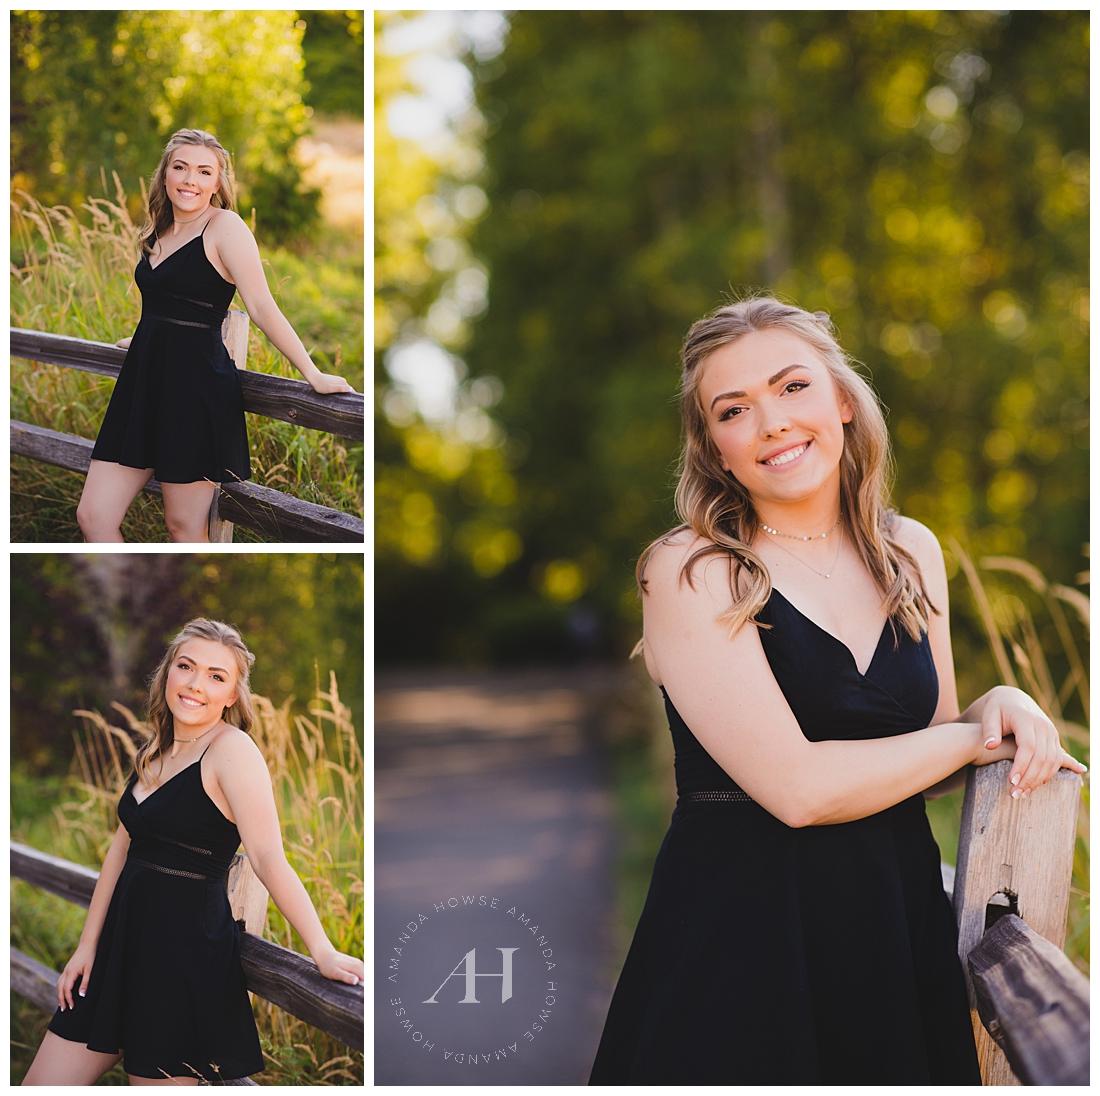 Hot Summer Day at Fort Steilacoom | How to Style Senior Portraits in the Summer, Cute Outfits for a Hot Day, How to Wear a Little Black Dress for Senior Portraits | Photographed by Tacoma Senior Portrait Photographer Amanda Howse